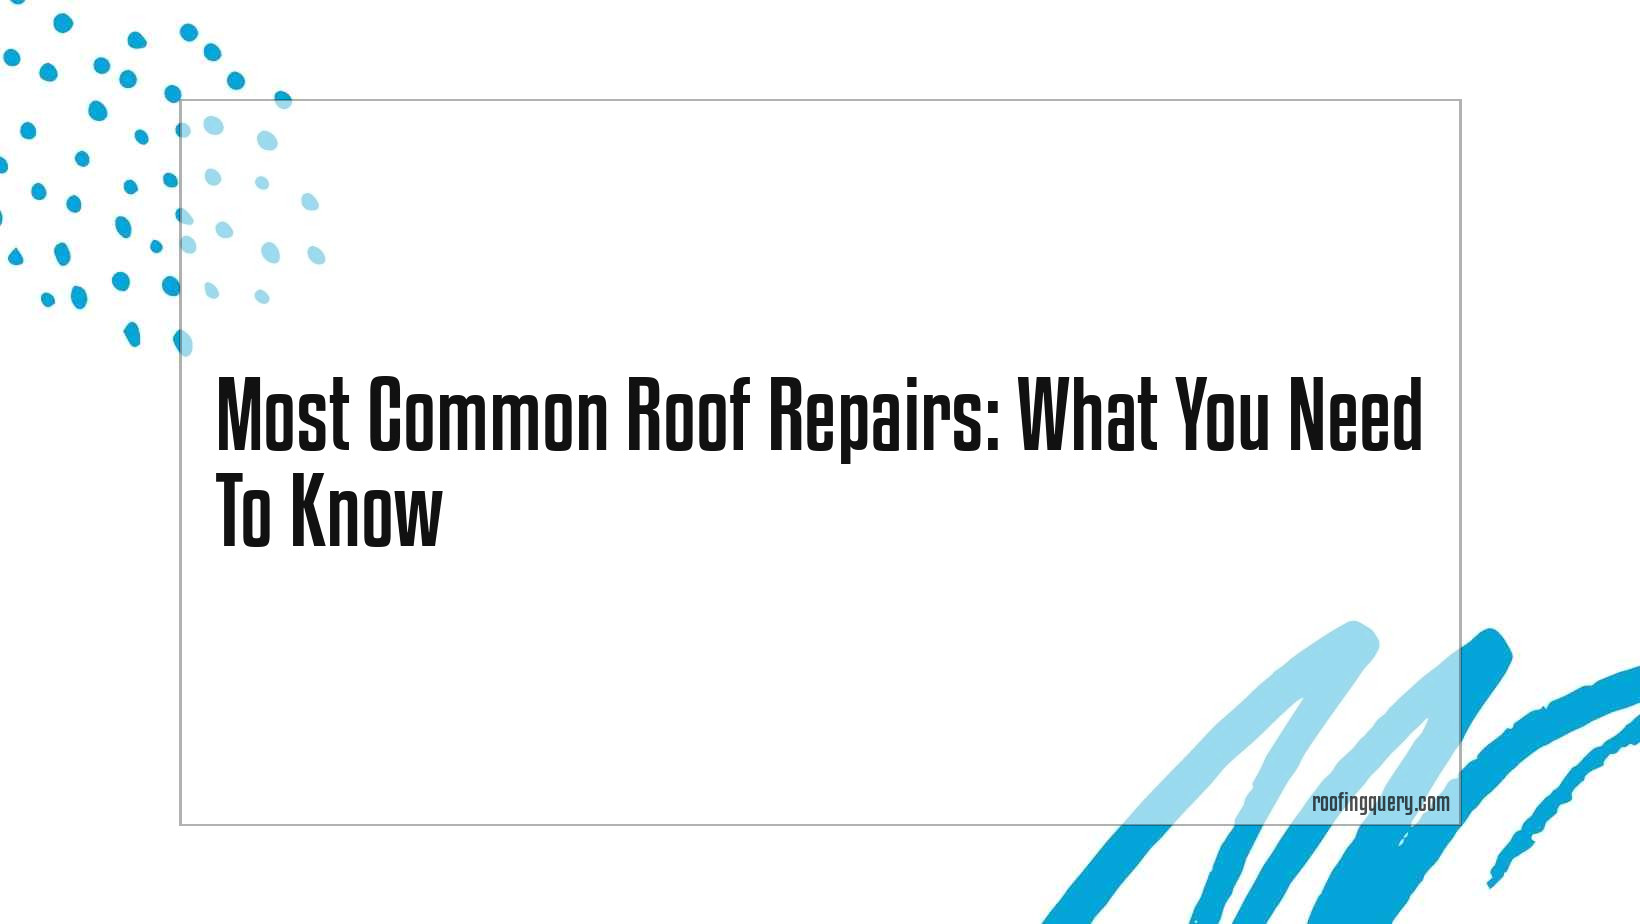 Most Common Roof Repairs: What You Need To Know